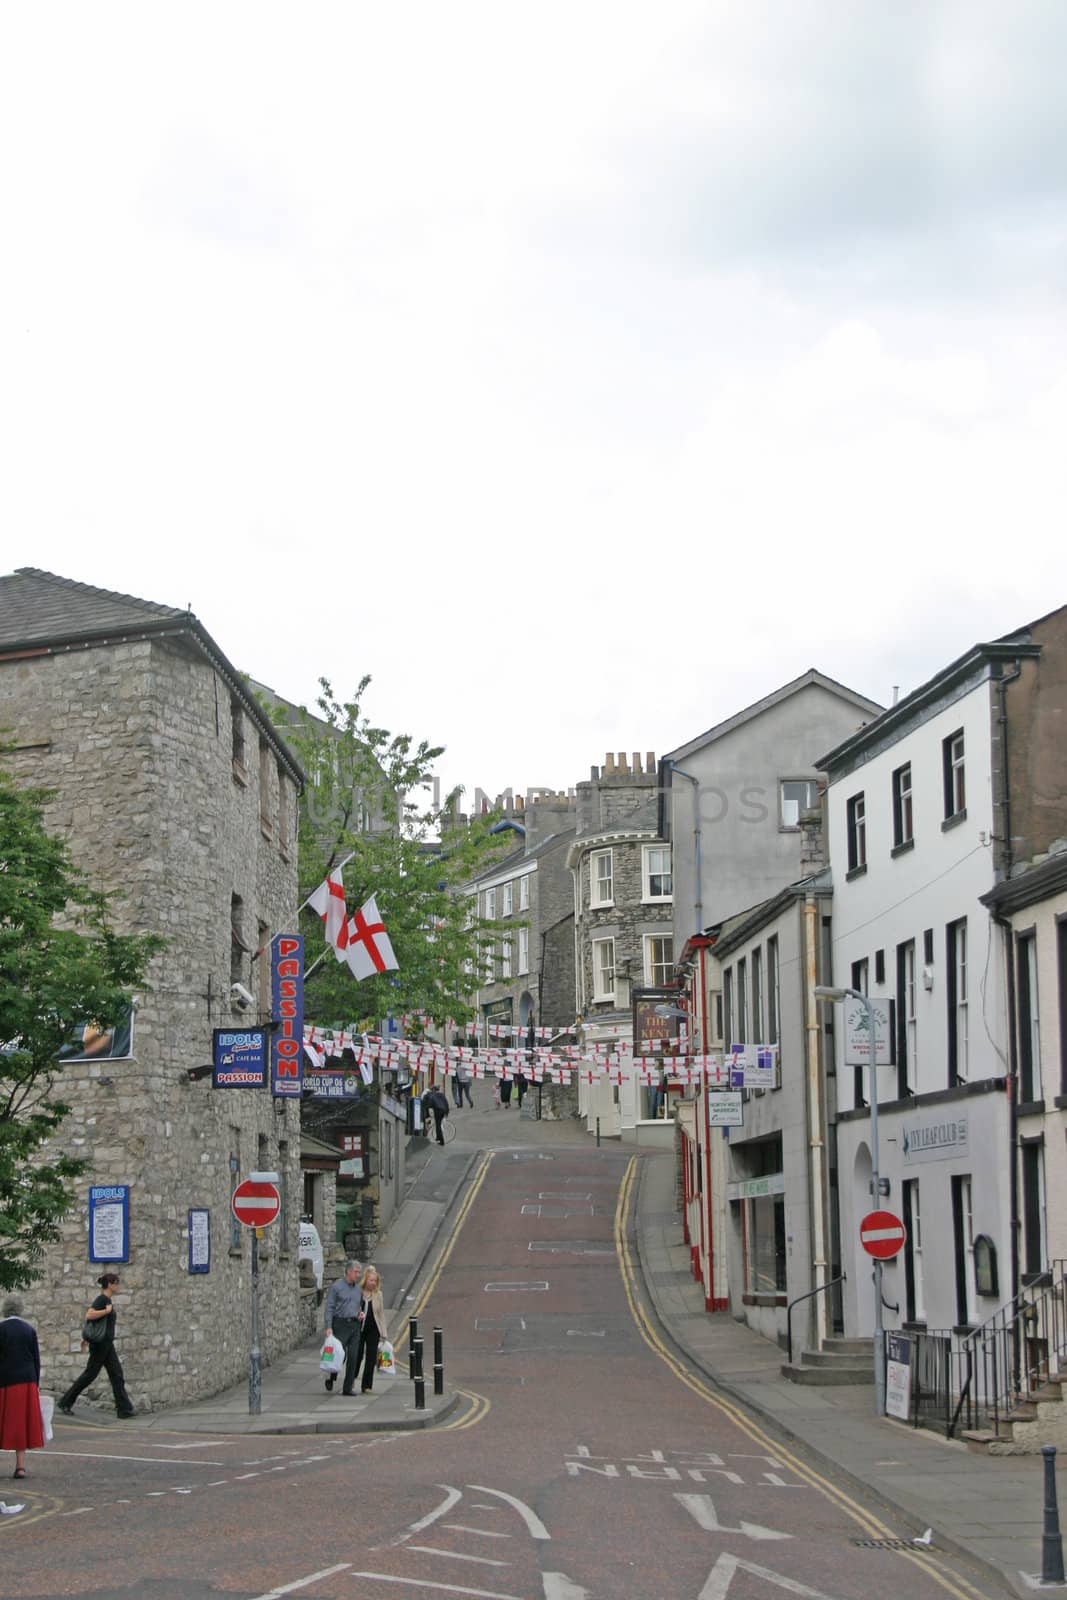 England Flags in Kendal Town Centre in Cumbria by green308